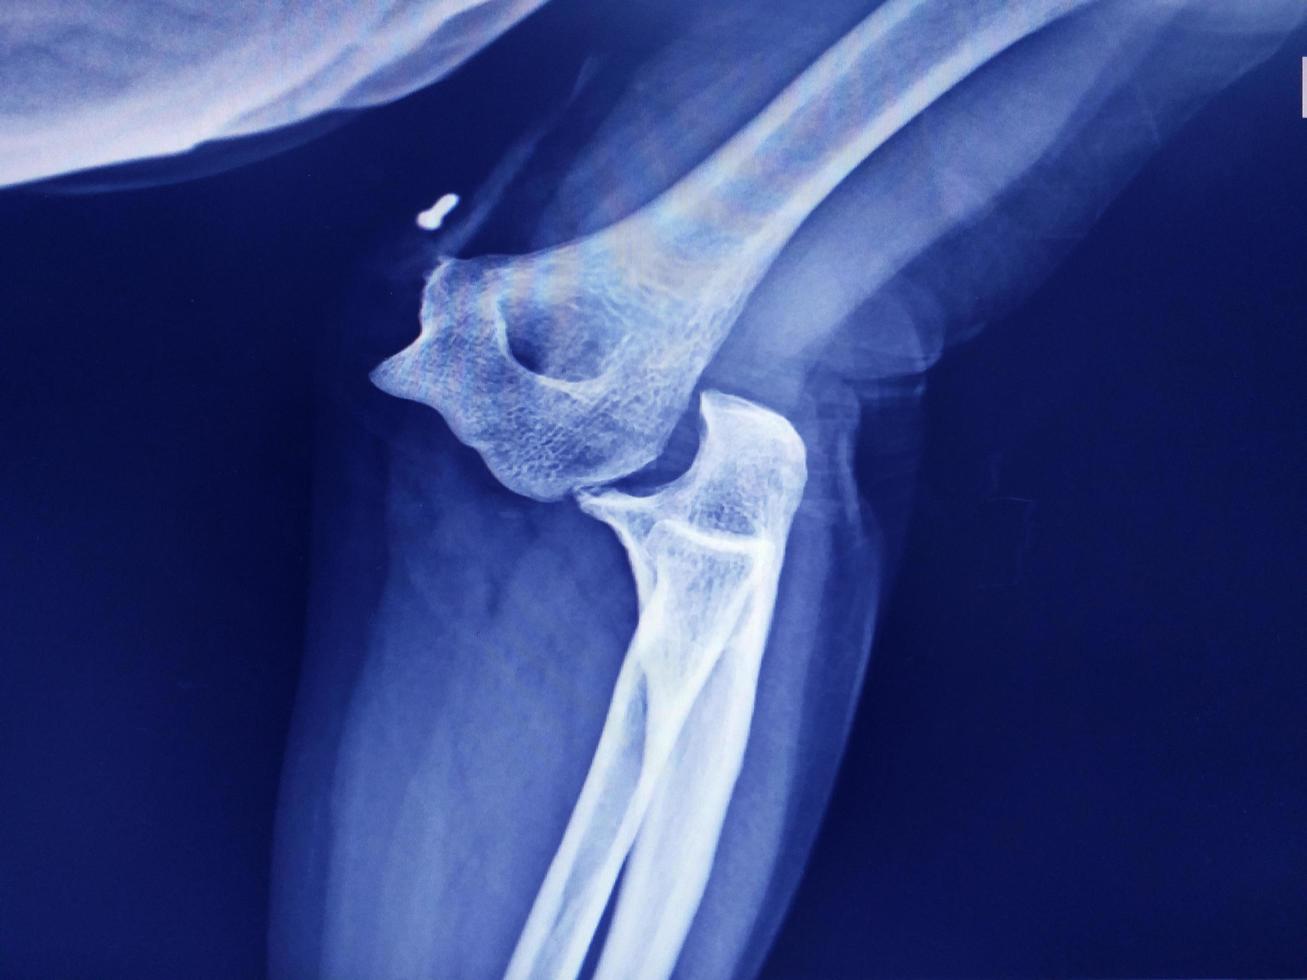 Elbow joint dislocation x-ray image. photo